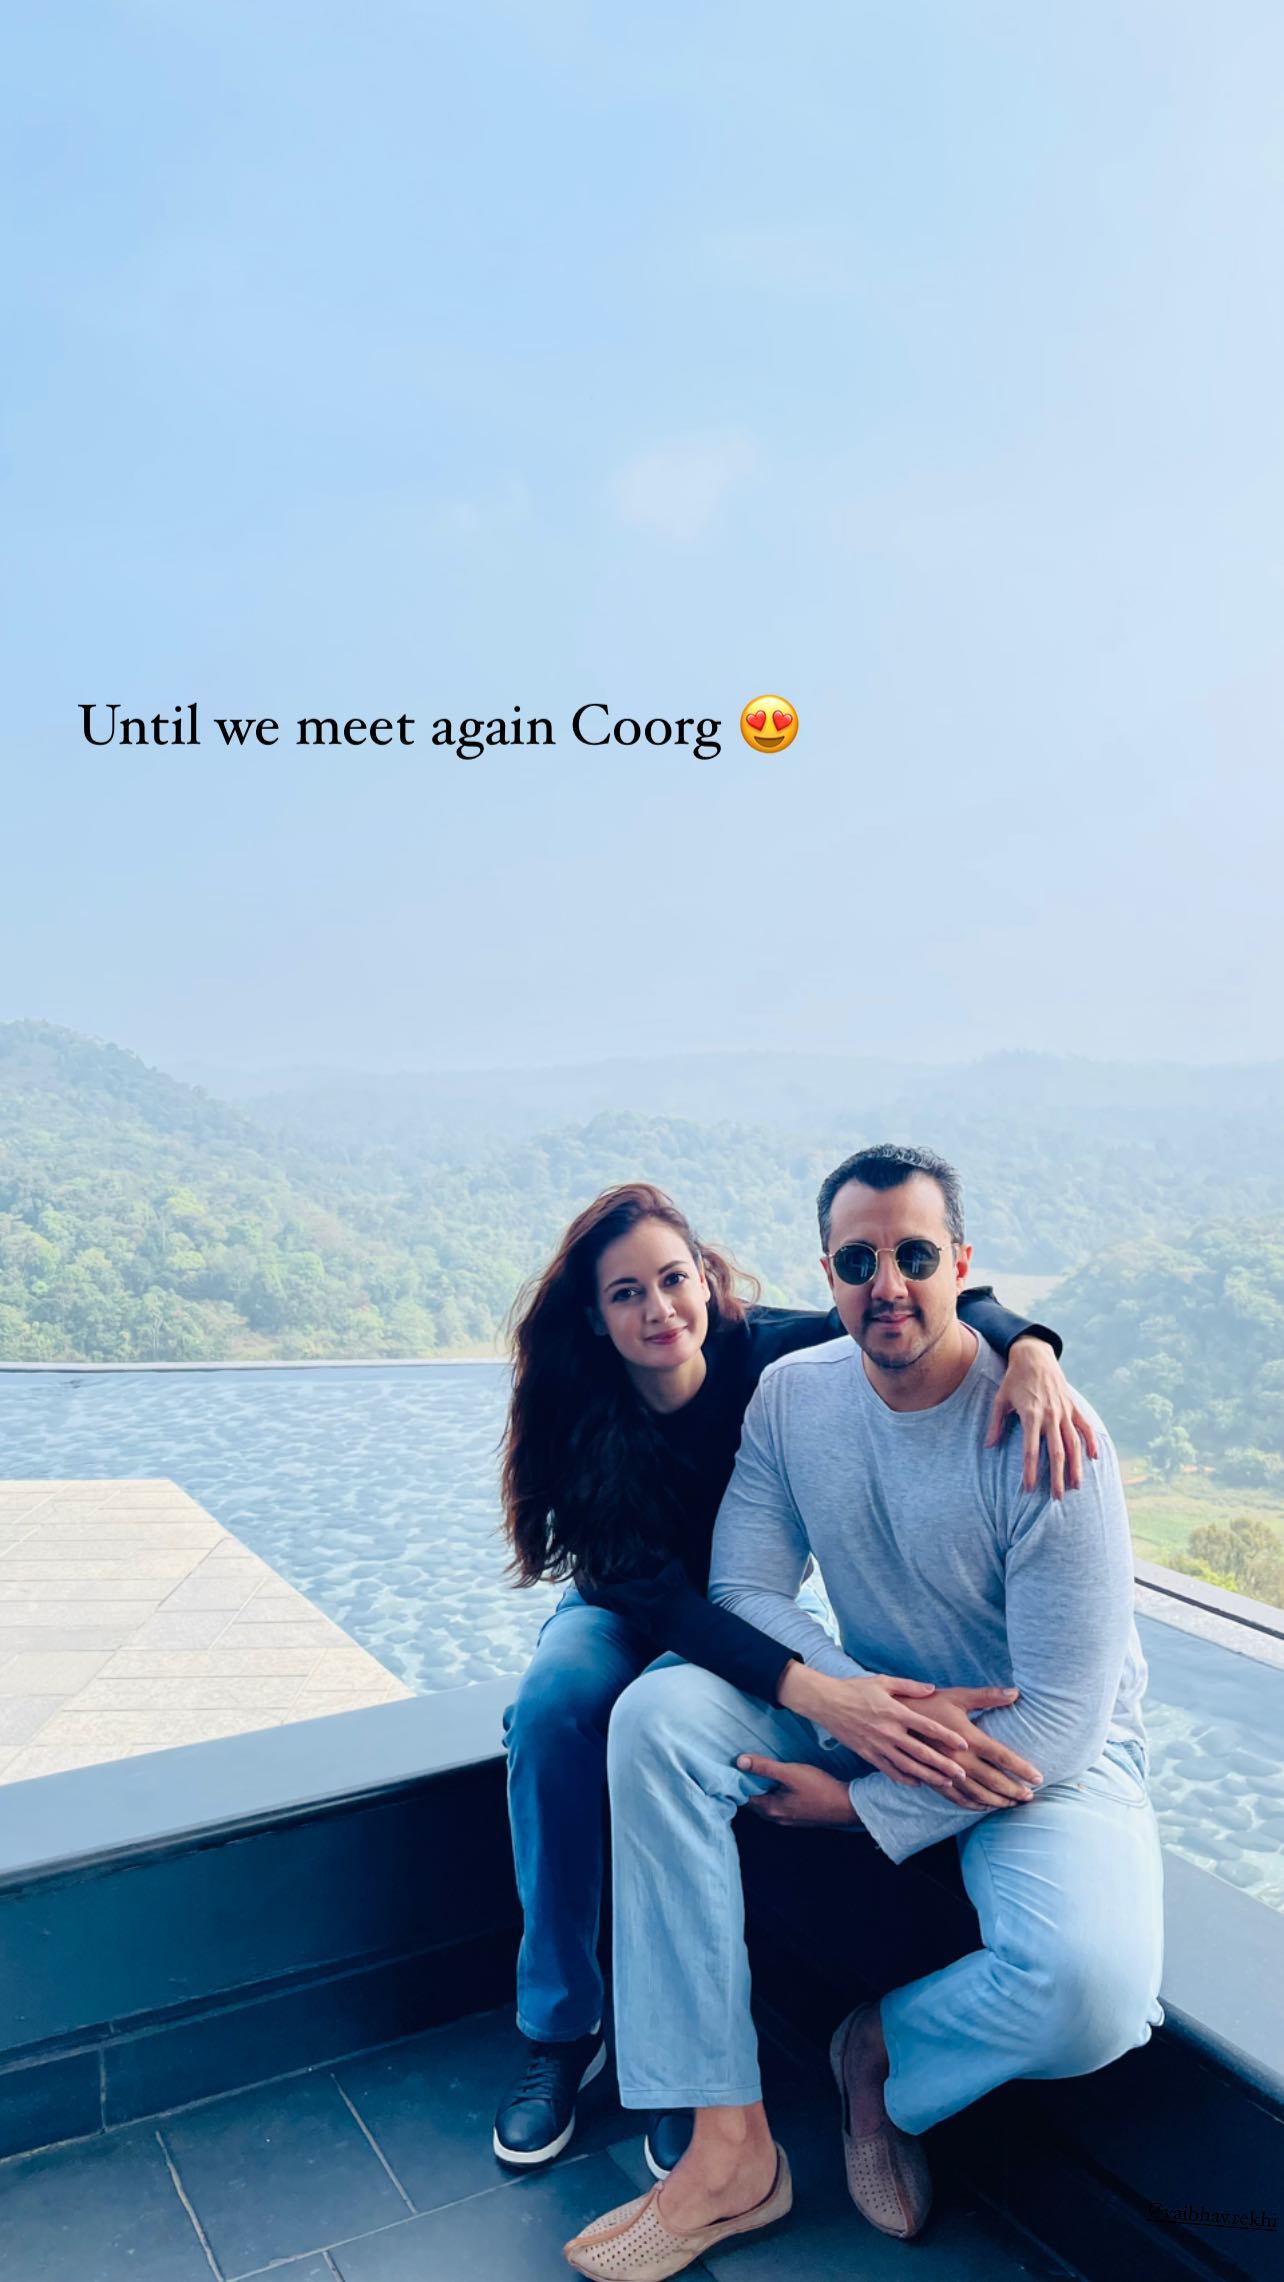 Dia Mirza Shares A Lovely Photo With Husband Vaibhav Rekhi As She Bids Farewell To Her Trip